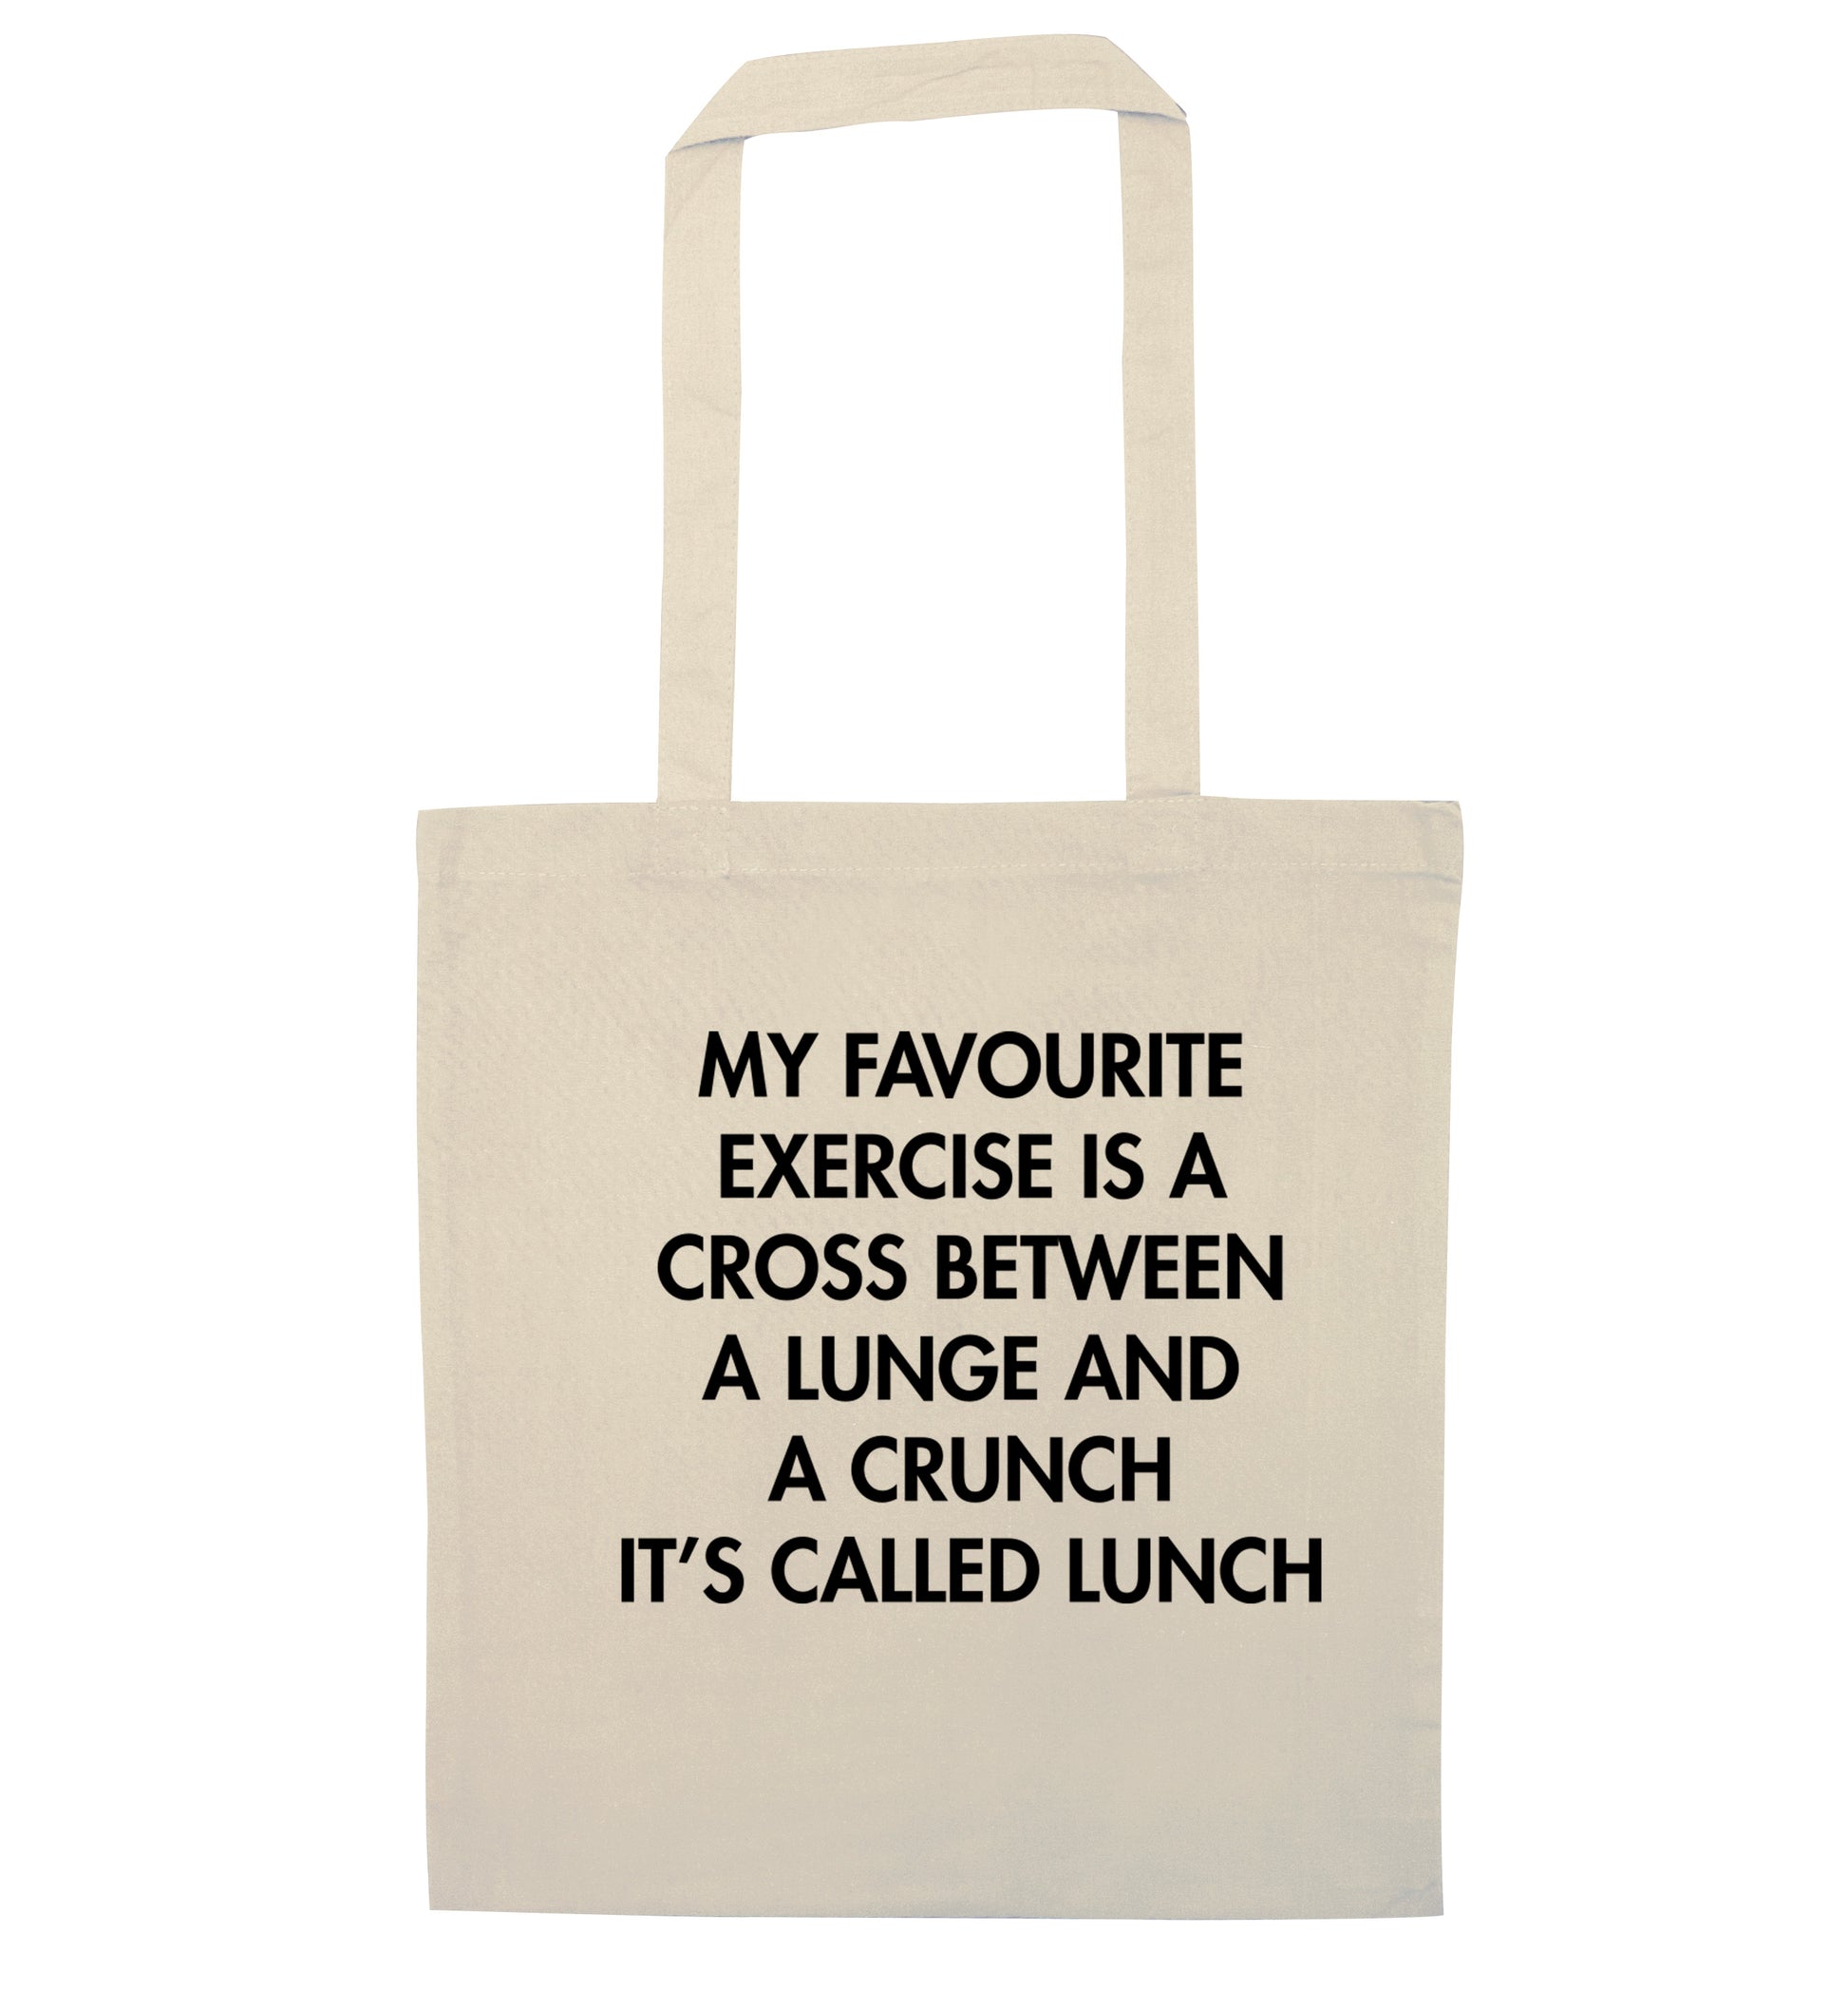 My favourite exercise is a cross between a lung and a crunch it's called lunch natural tote bag